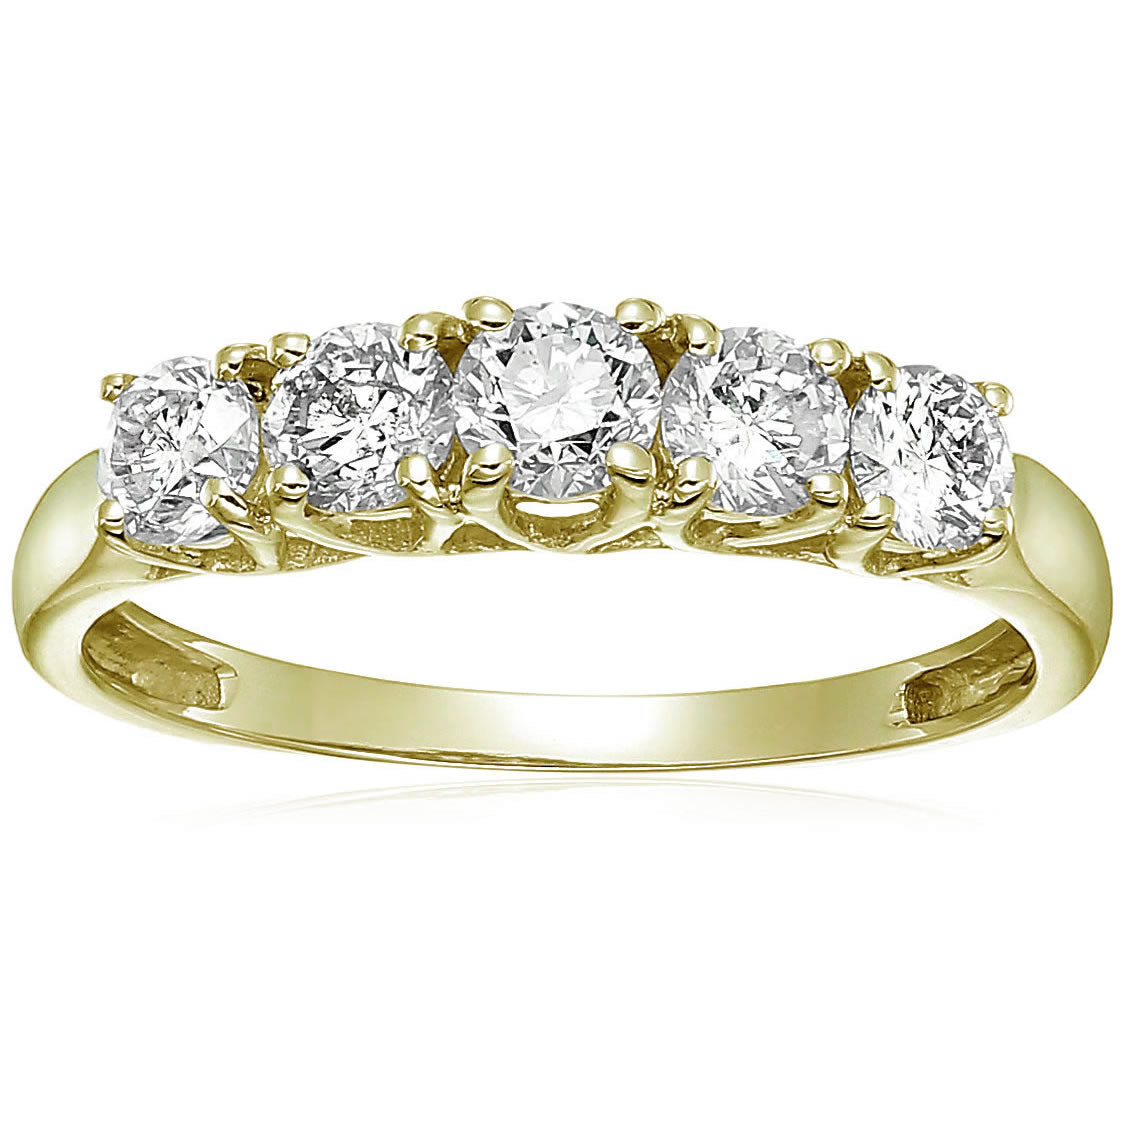 1 cttw Certified I1-I2 5-Stone Diamond Ring 14K Yellow Gold Engagement